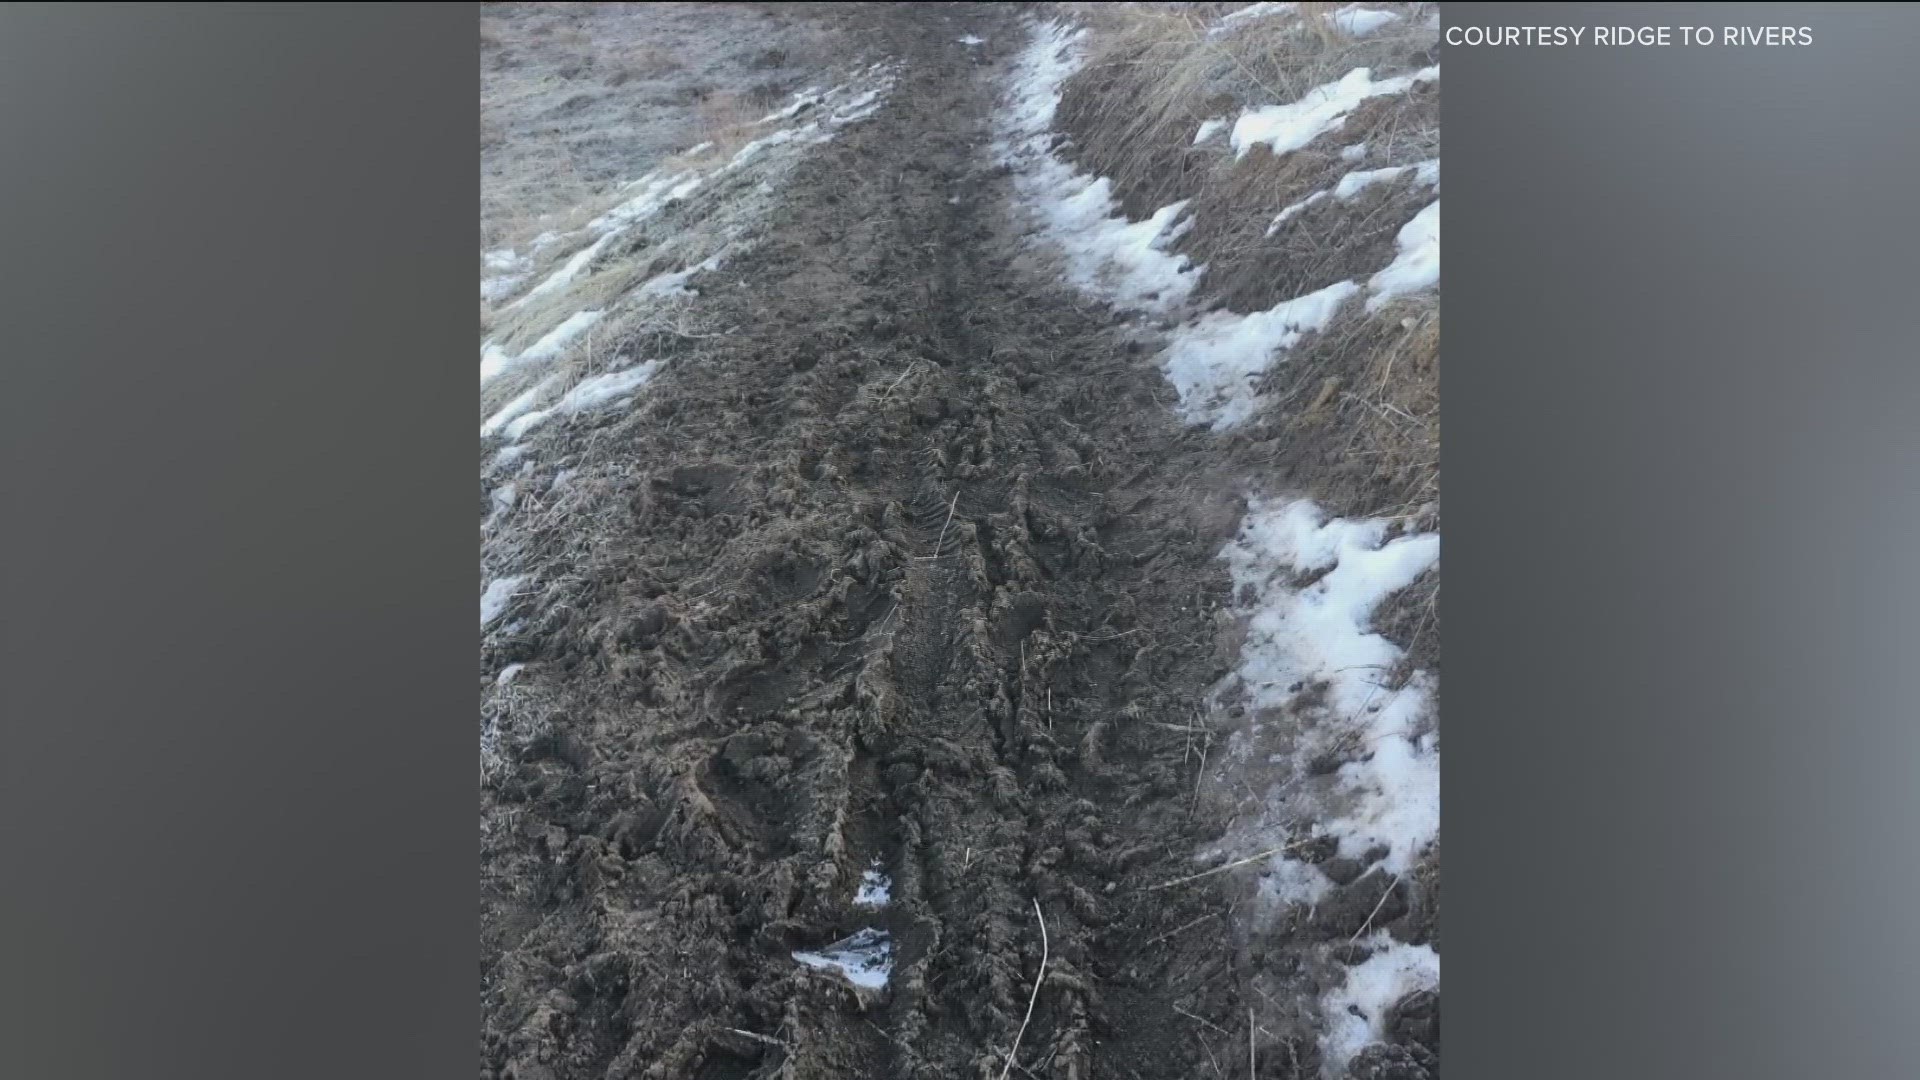 Trail manager said, "conditions, unfortunately, don't go well with trail use."